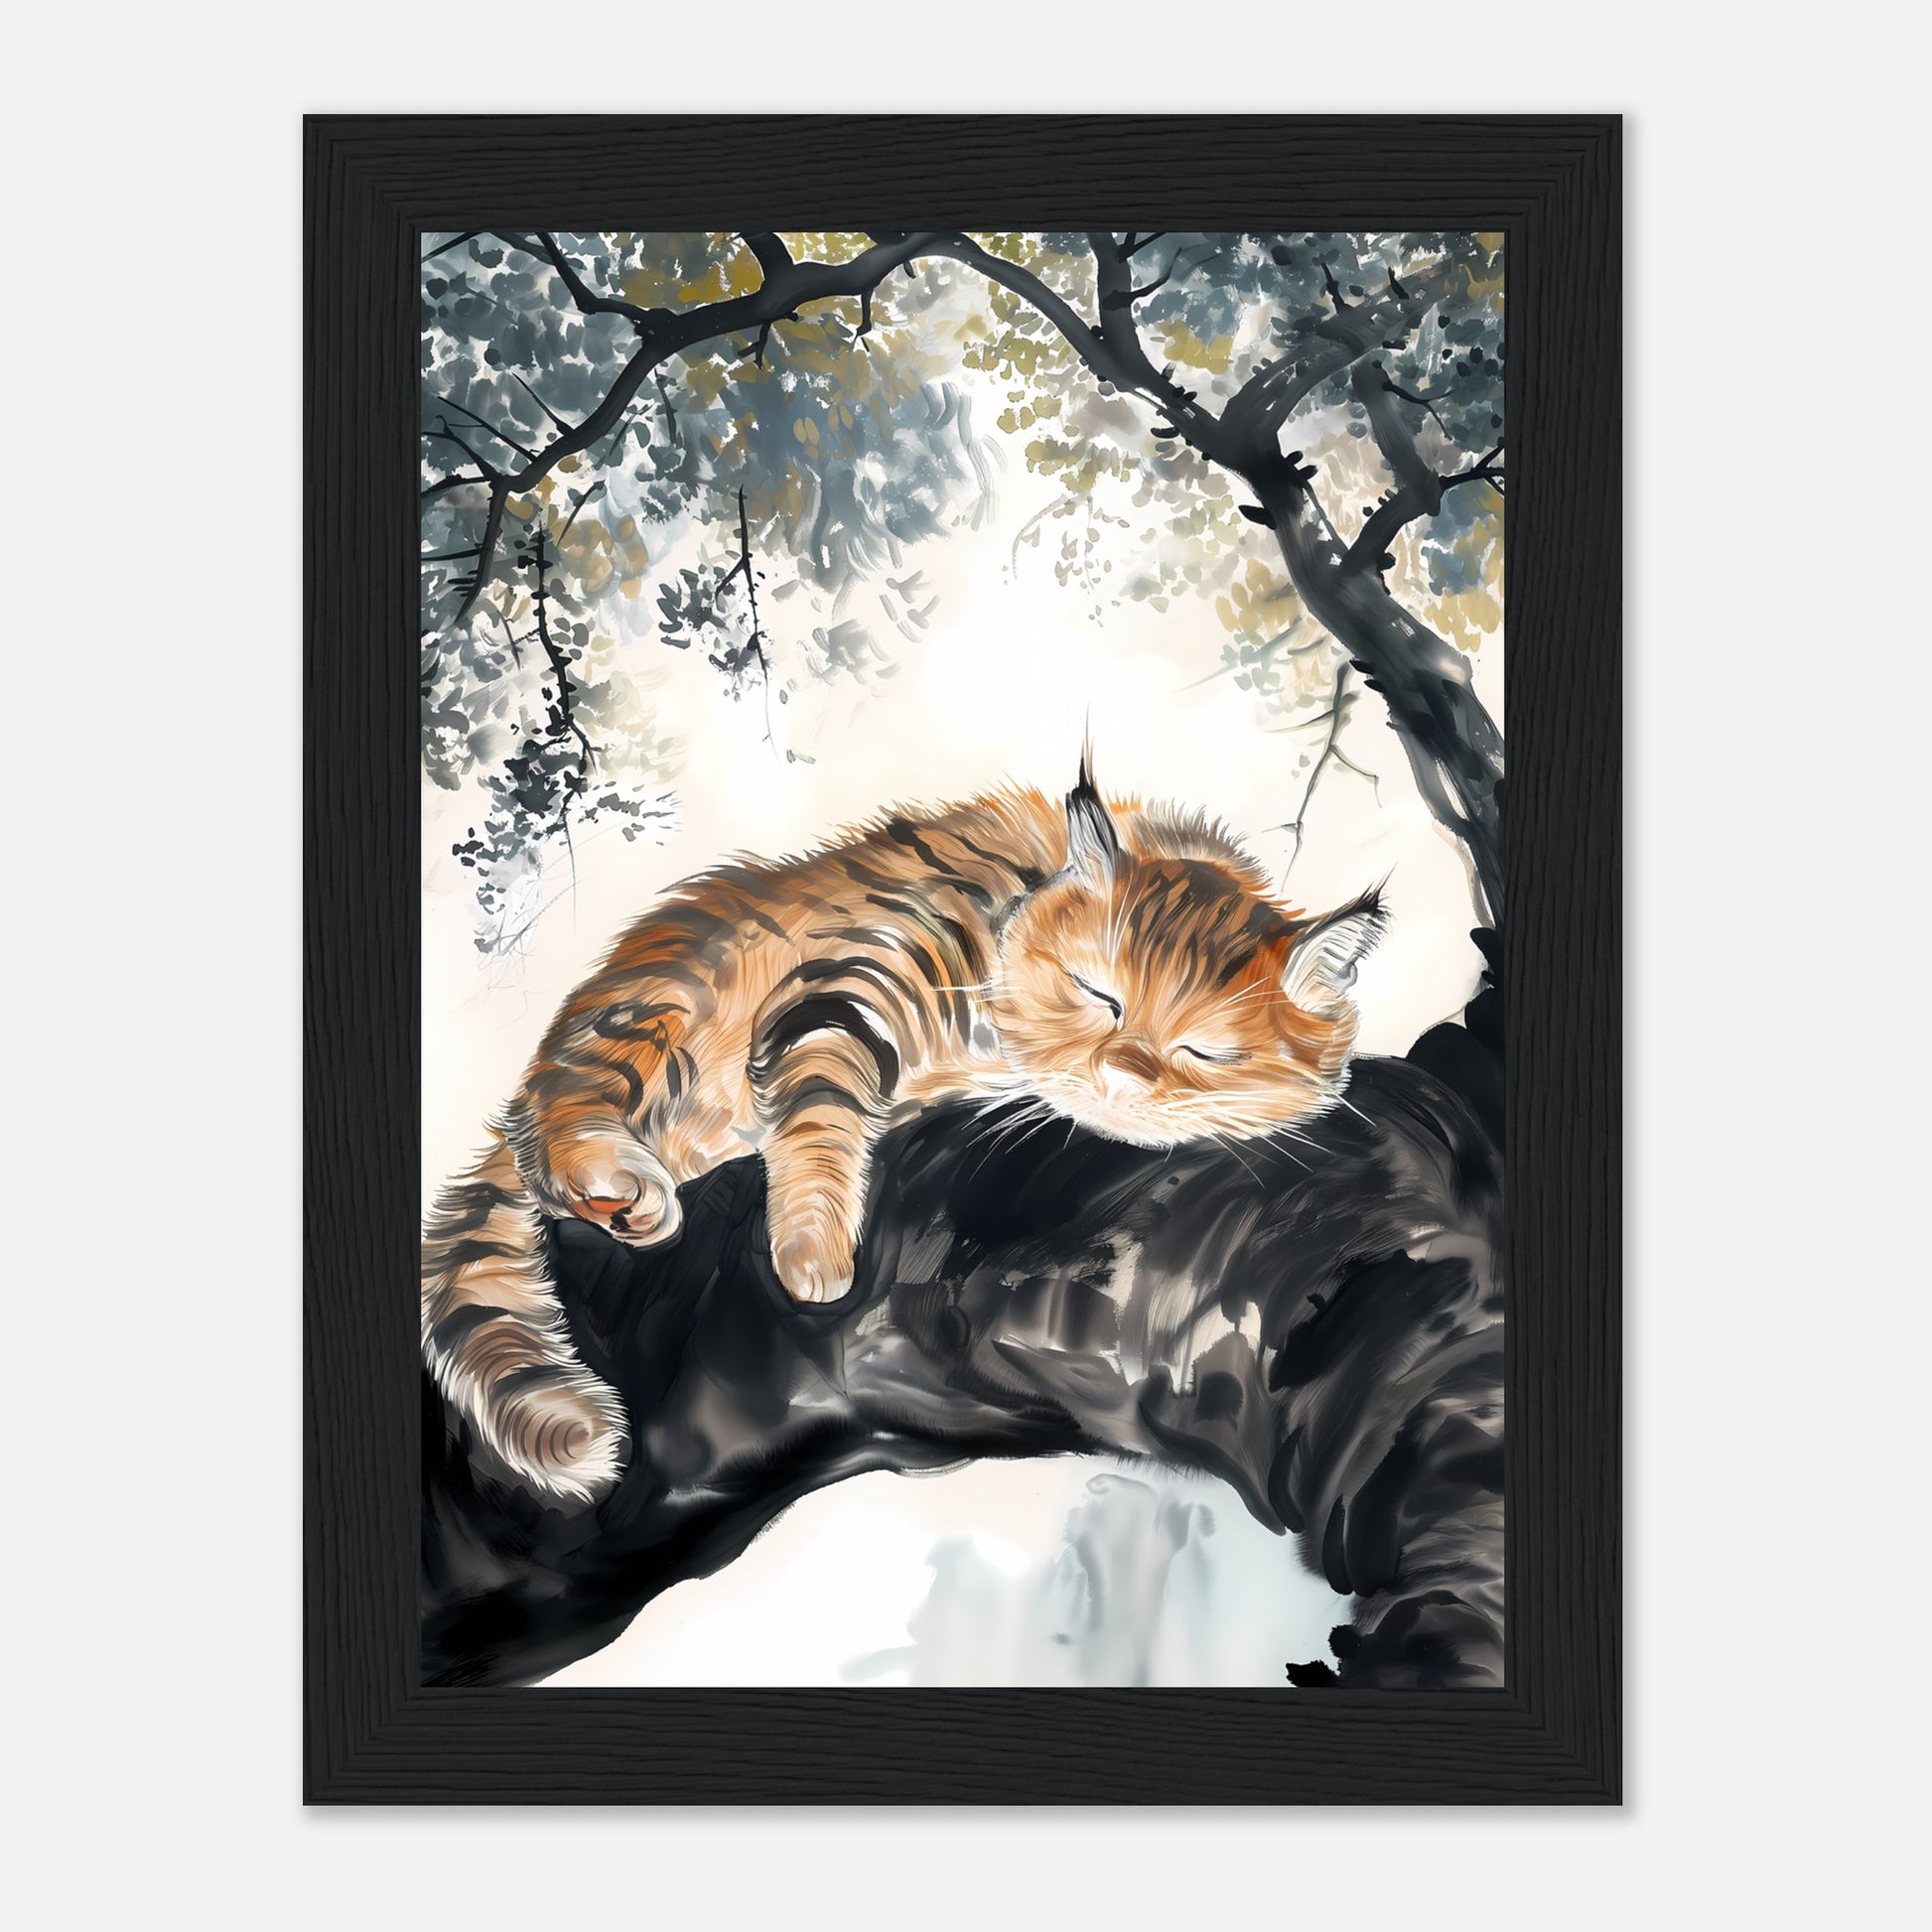 A painting of an orange tabby cat lounging on a tree branch.